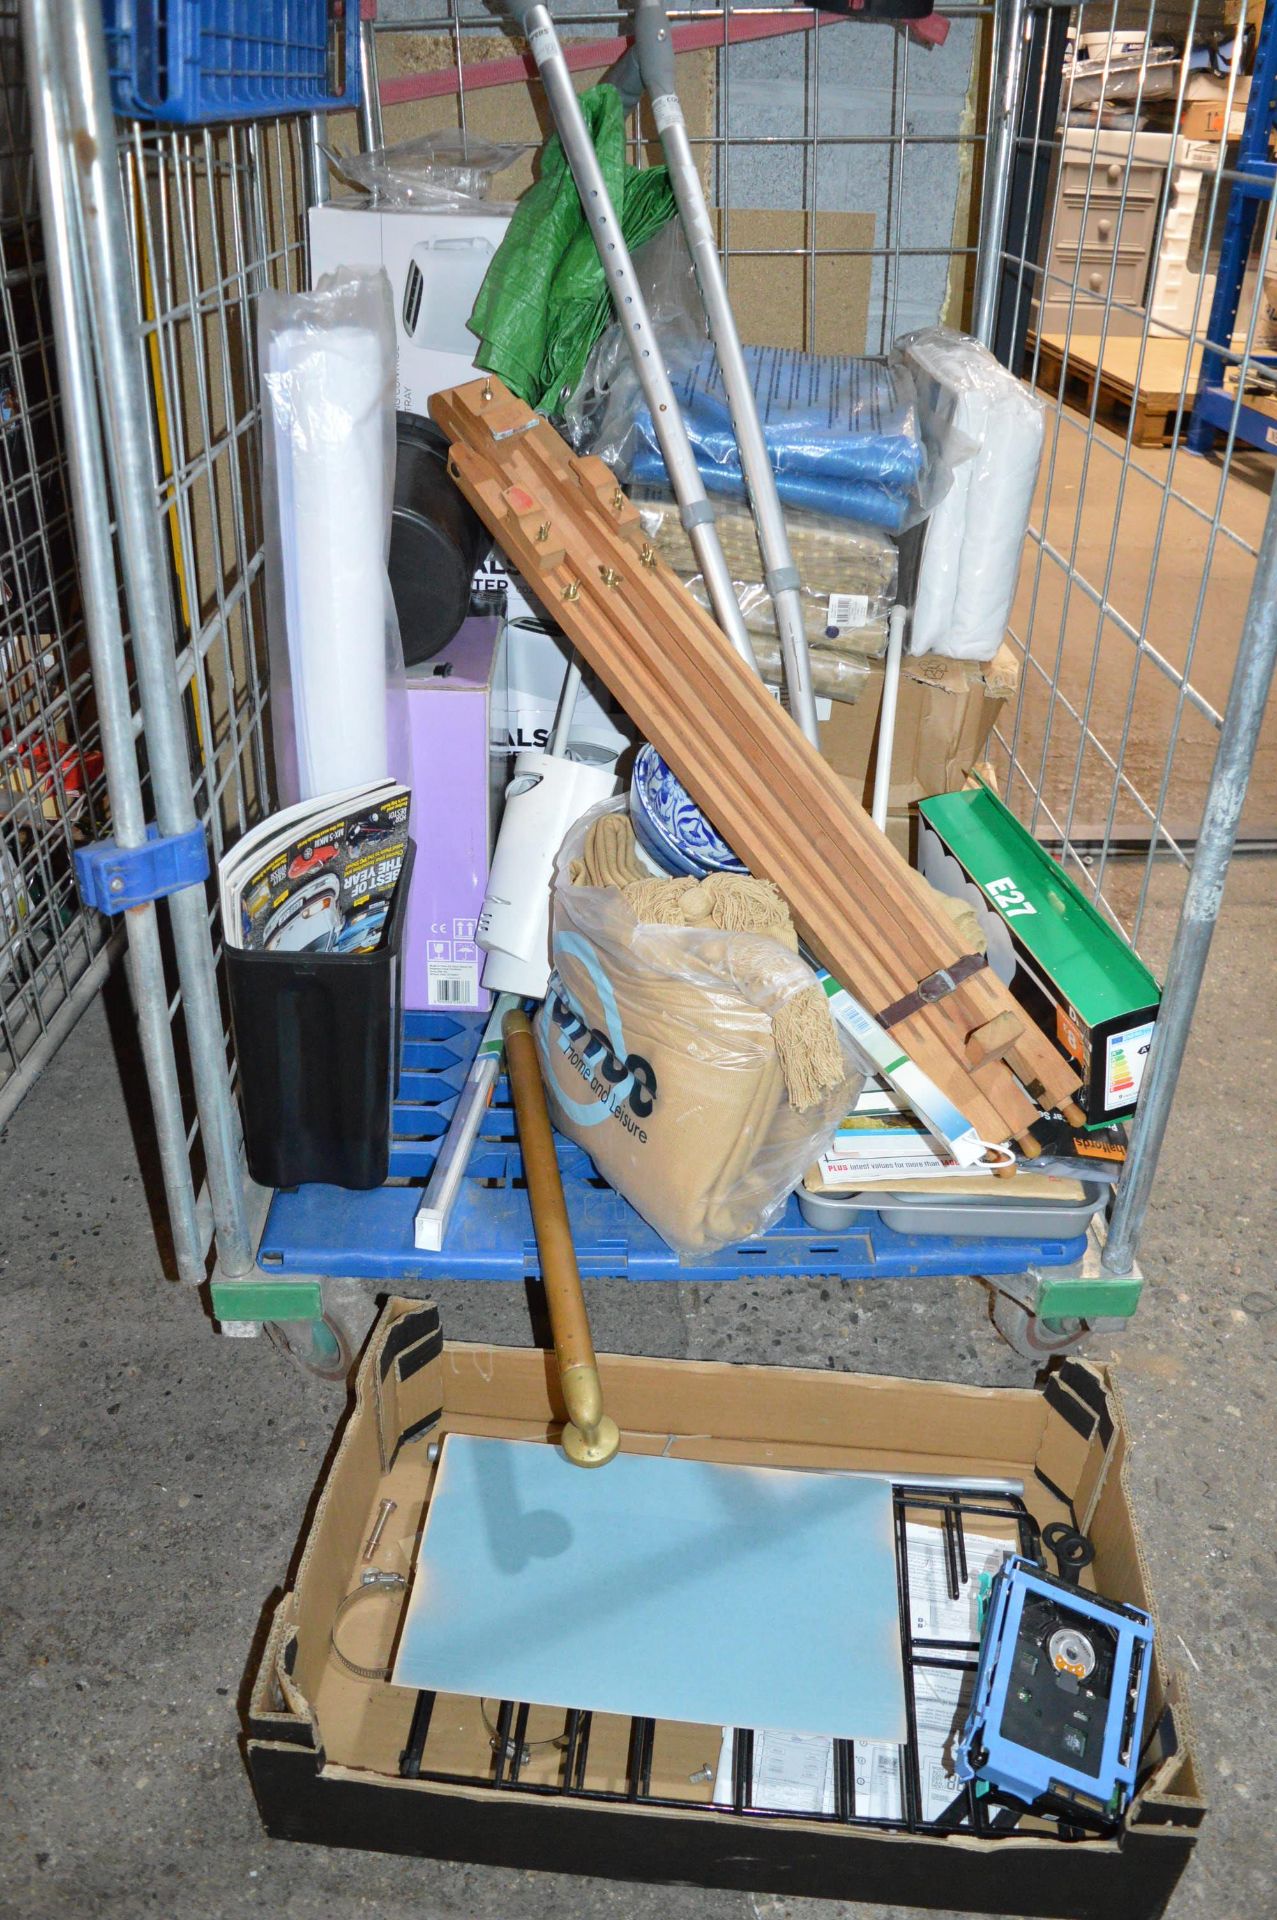 Quantity of Household Goods Including Toaster, Easel, Crutches, Car Seat Covers, etc. (cage not